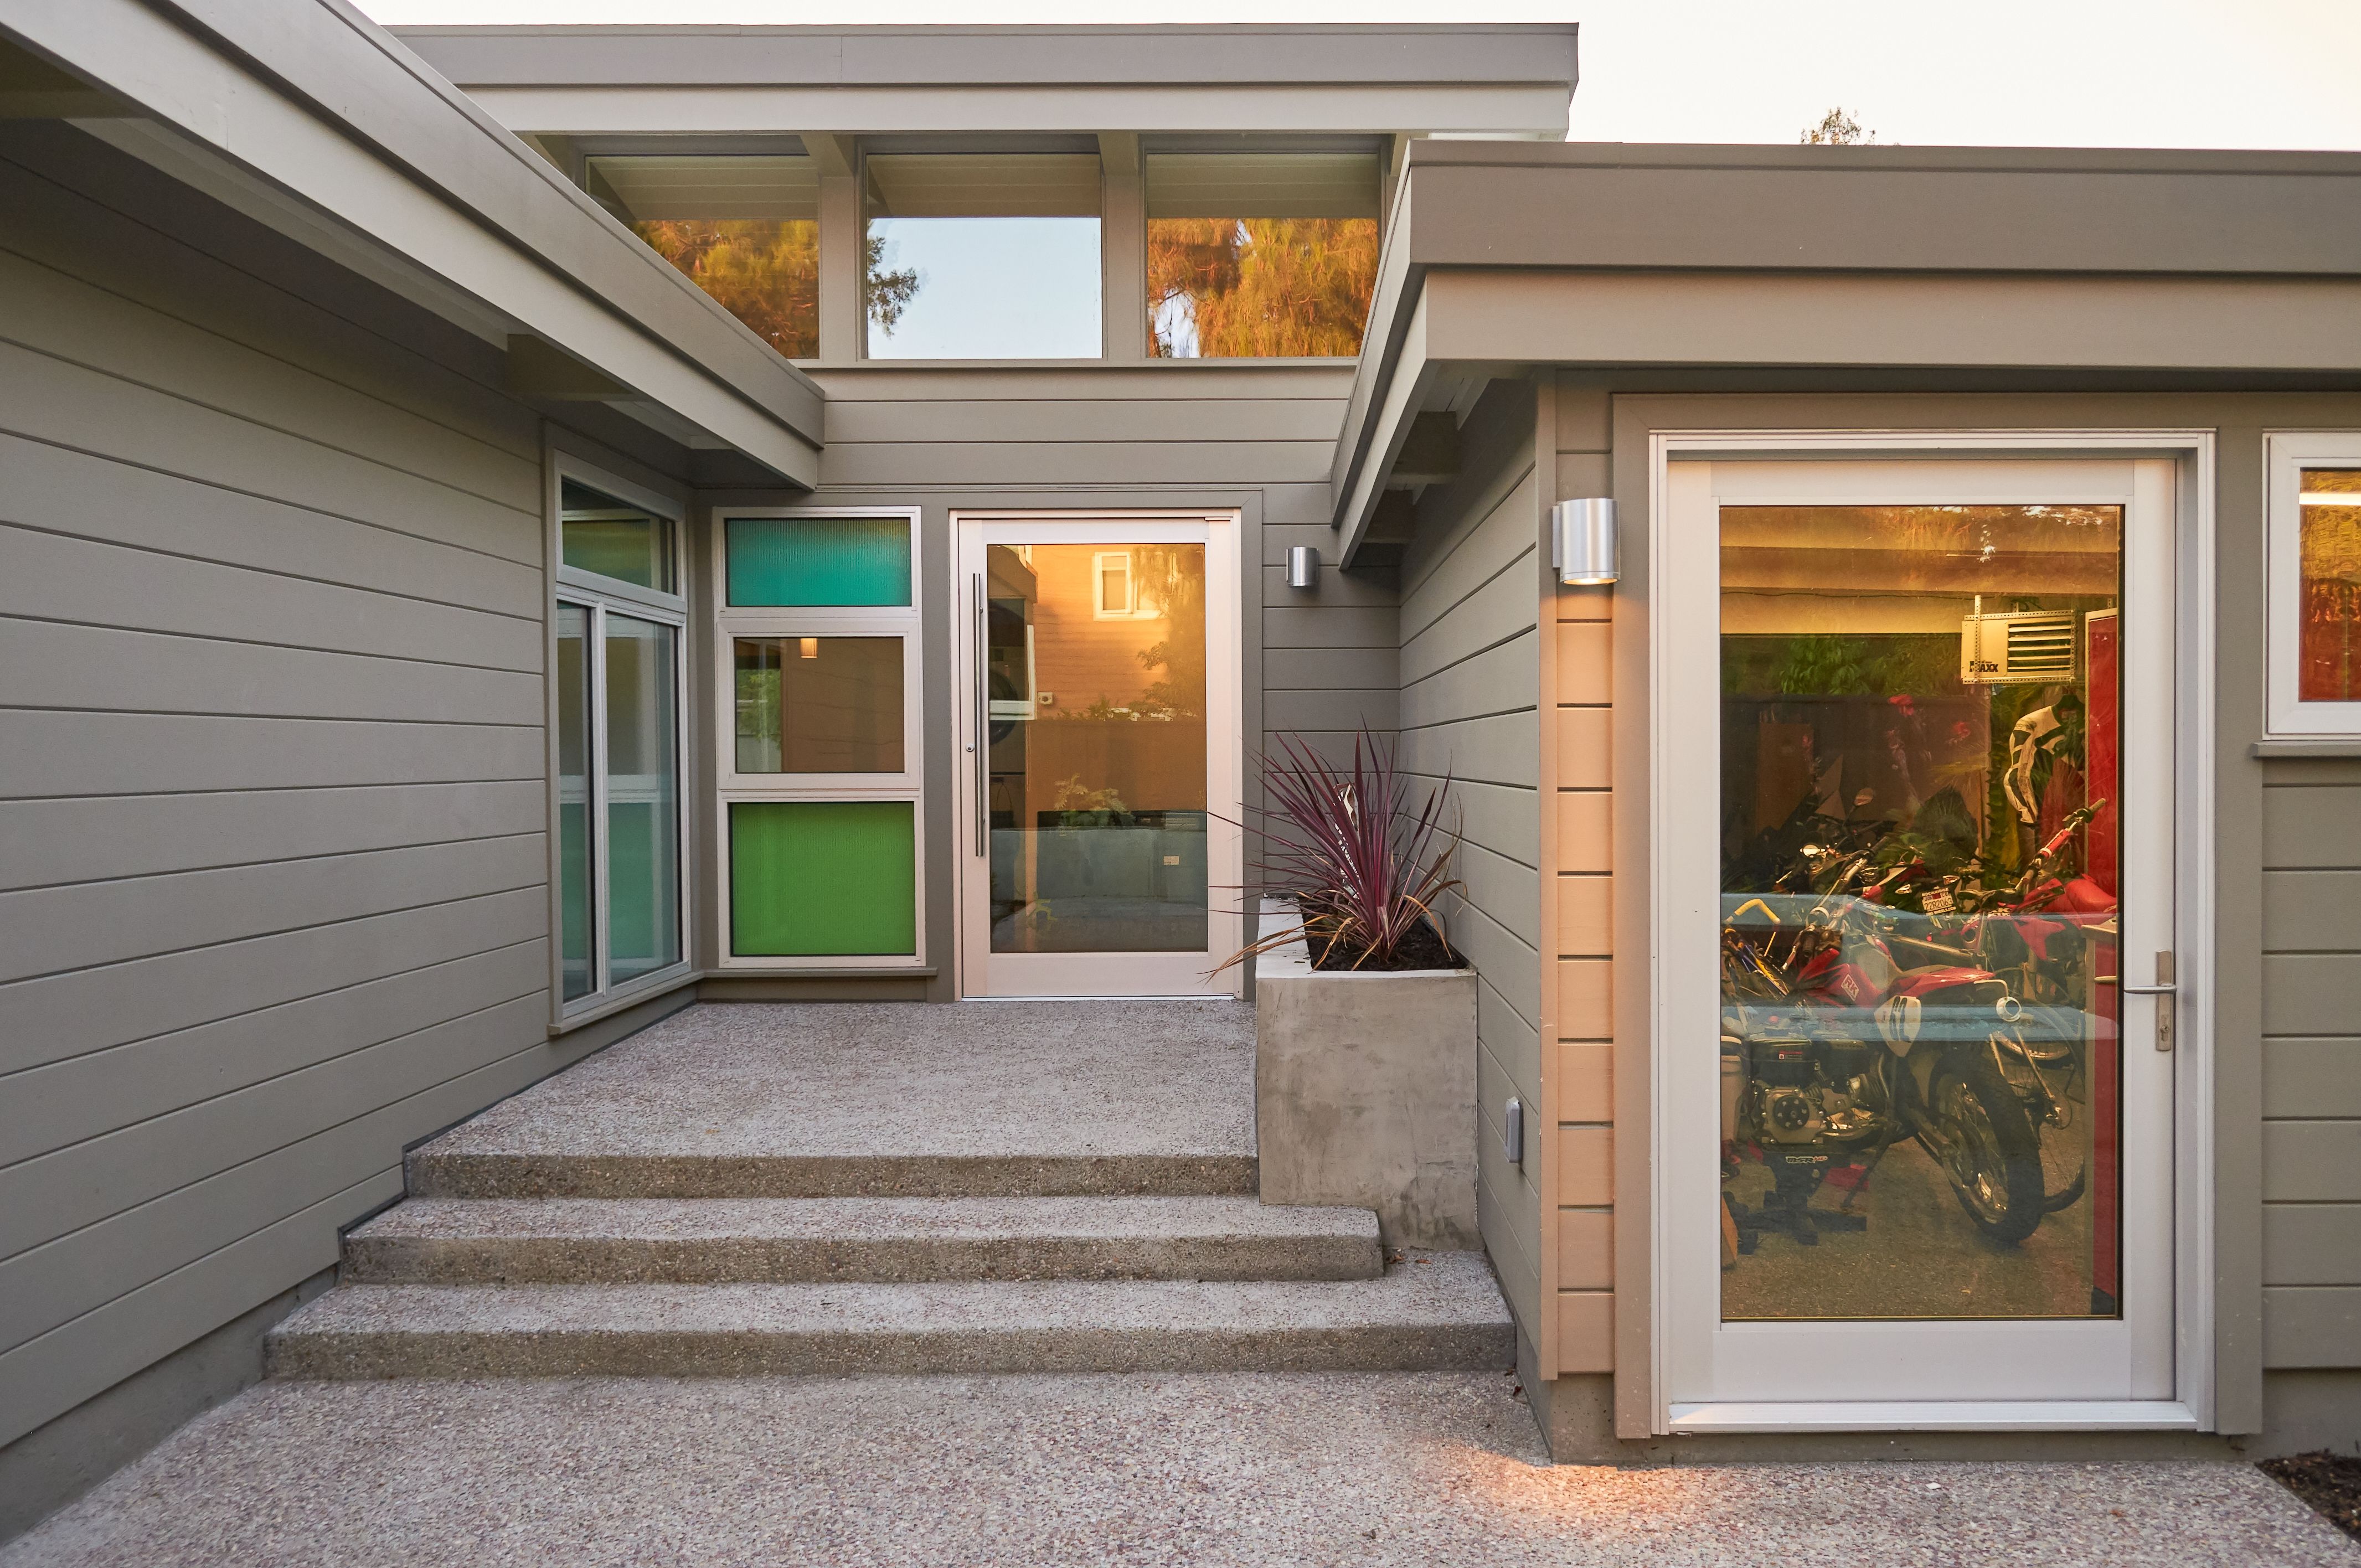 Not Sure If You Should Maintain or Upgrade Your Eichler Home? Retain the Original Vision with Expert Home Remodeling As an Eichler homeowner, you may be skeptical about renovations because you are anxious to preserve the original look of your home. A deteriorating façade can, however, increase your maintenance expenses every year. With rising home prices and the growing trend towards generational living, you may want to increase the existing interior space. Perhaps you dream of a modern kitchen and luxurious bathroom—two remodeling projects that provide greater comfort and significant returns on your investment. If you are trying to decide whether to maintain or upgrade your Eichler home, here is a quick overview of important dos and don’ts outlined in an eichlernetwork.com article. Eichler Home Maintenance and Renovation Guidelines • Replace old fencing: A rotting and sinking fence is unattractive and unsafe. Retaining the distinctive Eichler look can be a bit of a challenge. Homeowners who have walked the fine line suggest using the carport as inspiration. Mimicking the glass inserts, for instance, can give a sophisticated appearance. You may choose a cedar fence with bamboo posts for a rustic look. • Replace old siding: Repainting or staining worn out siding is just a temporary solution. The three most common types of Eichler style siding are available at eichlersiding.com. The company also offers custom solutions to replicate the specific type your home needs. • Restore exterior lighting fixtures: A light sandblasting can remove the dirt and corrosion from your anodized aluminum fixtures. Powder-coating or re-anodizing will restore them beautifully. You may want to consider adding motion sensors for enhanced security. Keep in mind that if the corrosion is severe, re-anodization might give mixed results. If so, look for contemporary lights that will blend nicely with the Eichler design. • Change the old front door: Finding the right replacement for your front or garage door is challenging. To upgrade the look without taking away from the Eichler charm, architects recommend custom doors. It is also possible to automate your original garage doors with electronic sensors. Except when broken, it is not necessary to replace them. • Aim for an integrated look with your home addition: This is perhaps the hardest part of any Eichler home renovation project. Inappropriate remodels not only look out of place, they will also lower your property value. It is best to hire a professional home remodeling contractor with extensive knowledge of Eichler designs. Eichler Home Remodeling Specialists At Flegel’s Construction Co., we work hard to exceed your expectations of workmanship and service quality. As Eichler home renovation specialists, we create a harmonious blend of past and present. You can count on us to preserve the unique, mid-century architectural features of your home while giving it a modern touch. We are happy to work with your designer/architect to ensure your Eichler home renovation project is a success. These testimonials from our happy clients in Silicon Valley including Palo Alto, Los Altos, San Jose, Cupertino, Mountain View, CA, speak for our quality. Call 408-269-1101 or contact us online to learn more about how to maintain or upgrade your Eichler home.